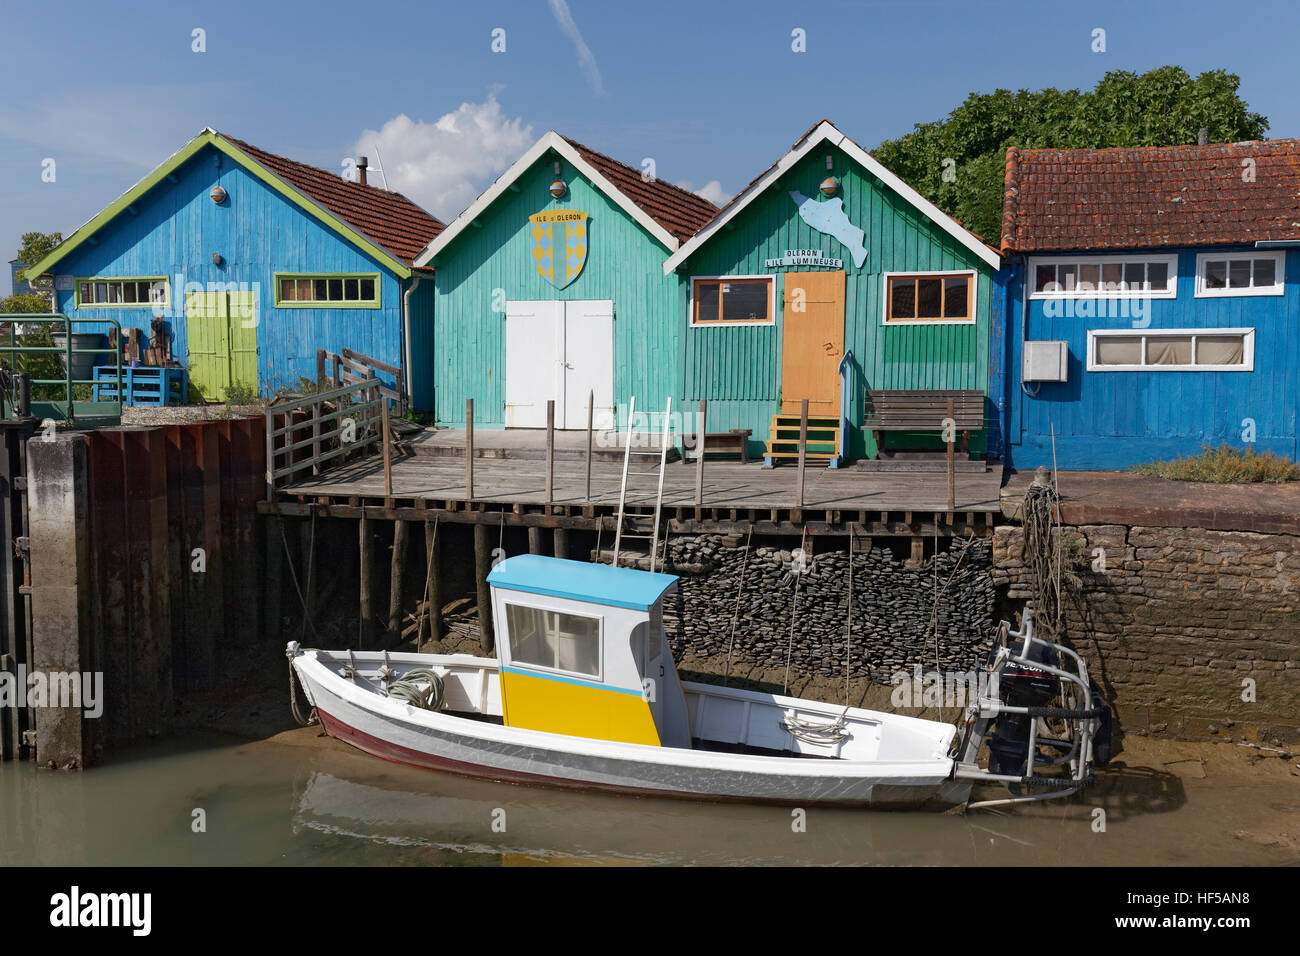 Colorful huts of oyster farmers and boat on a canal, Le Château-d'Oléron, Oléron, Charente-Maritime, France Stock Photo